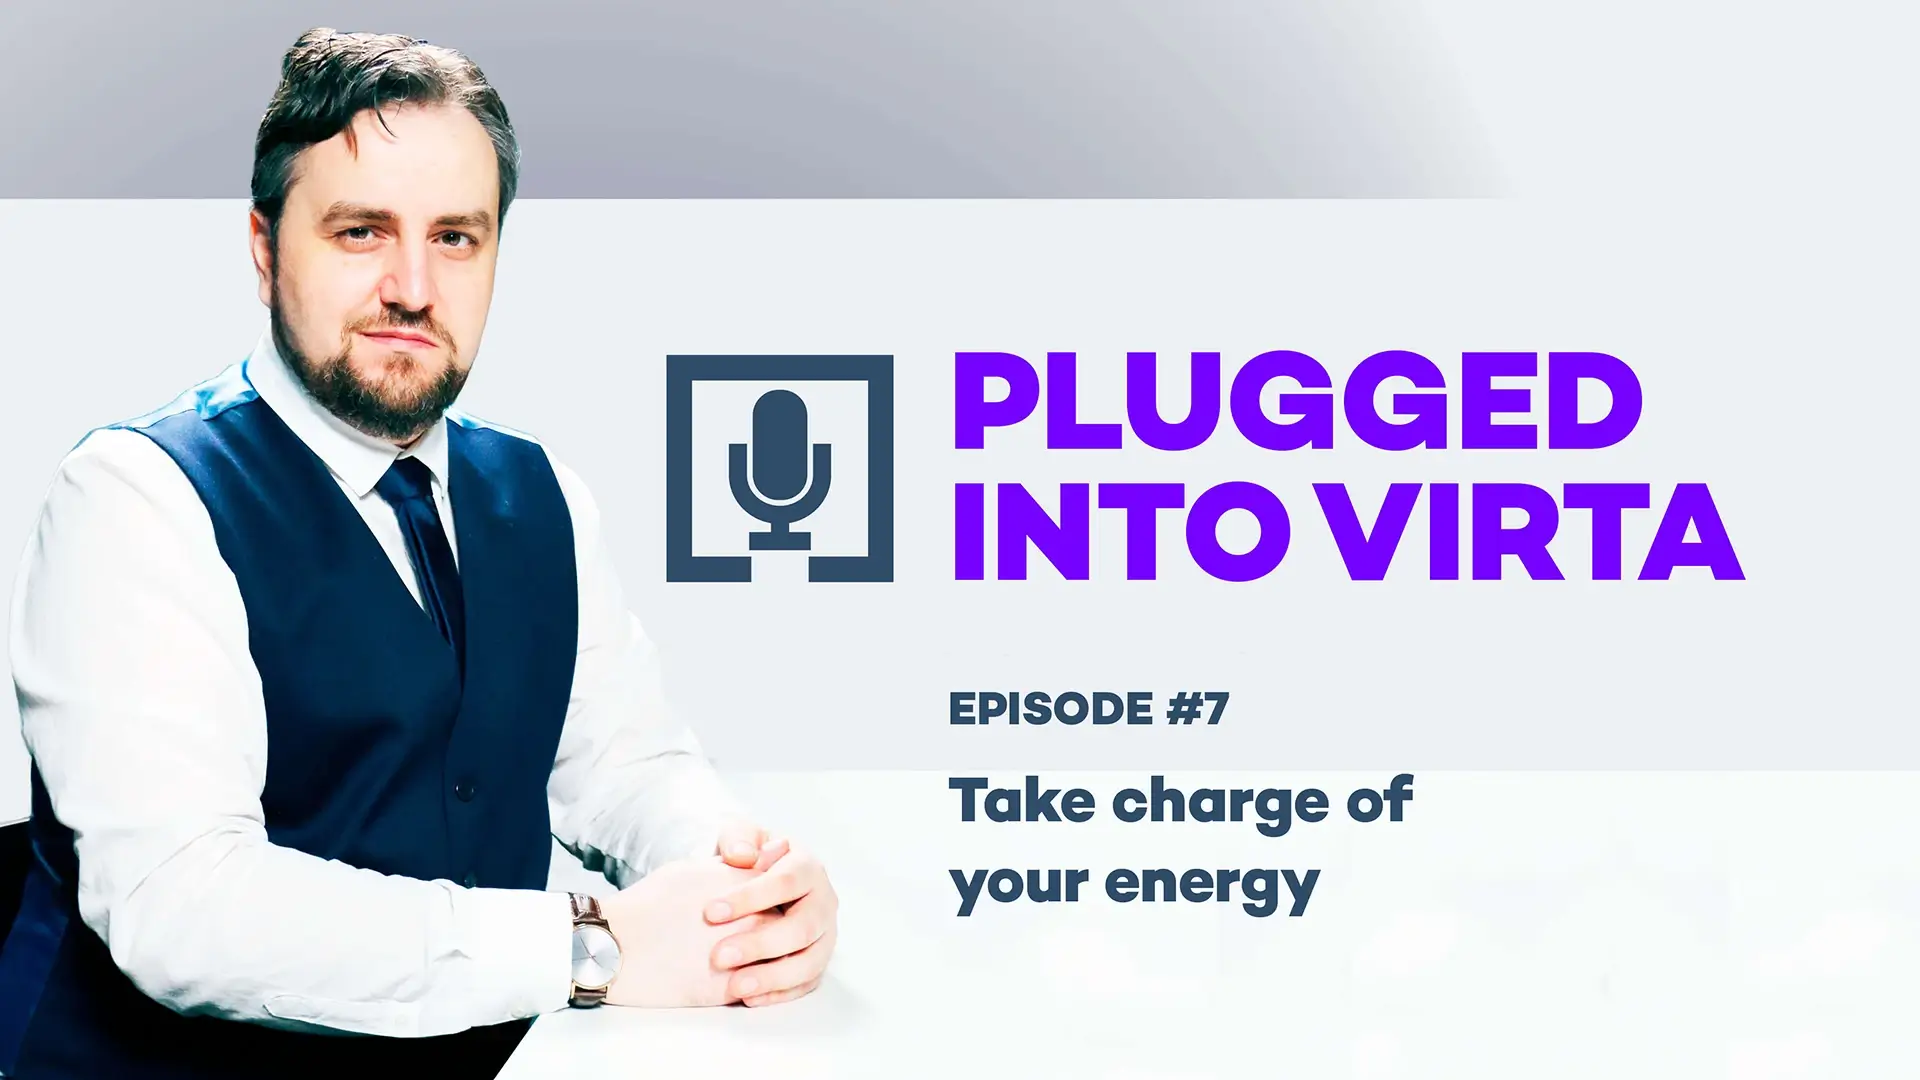 Plugged into Virta Episode 7 Take charge of your energy